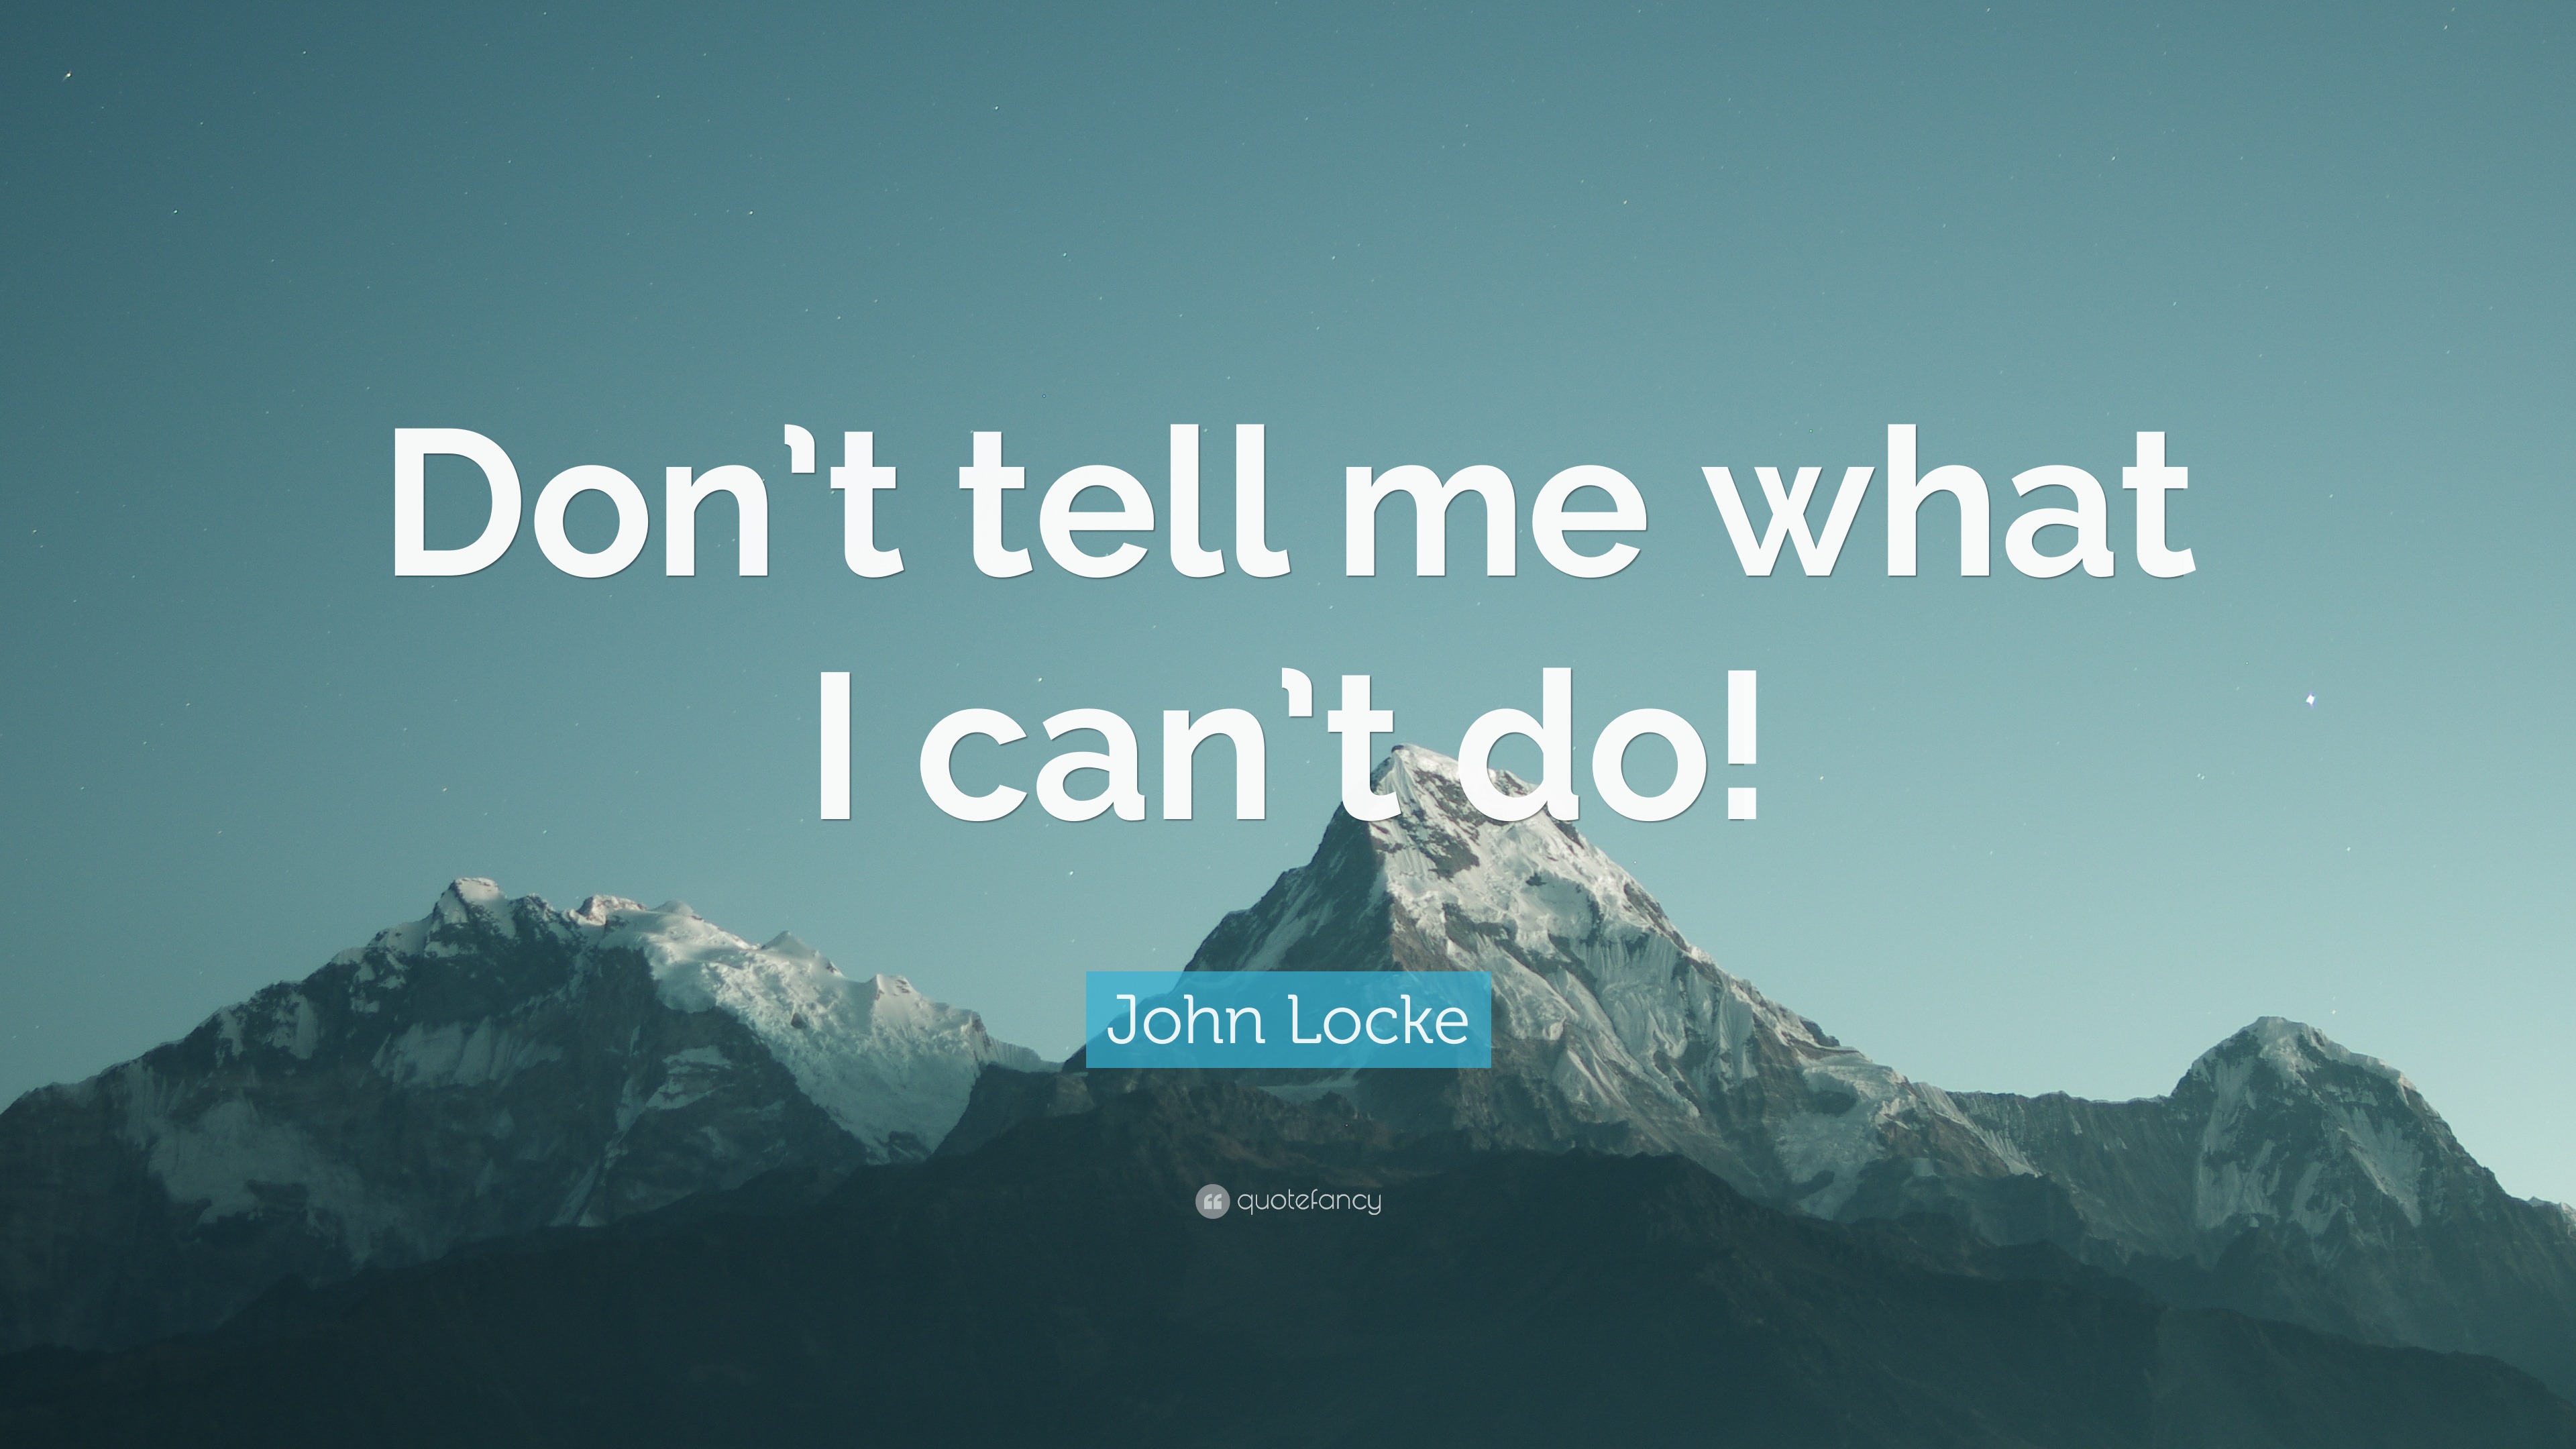 Don T Tell Me What To Do John Locke Quote: “Don’t tell me what I can’t do!”